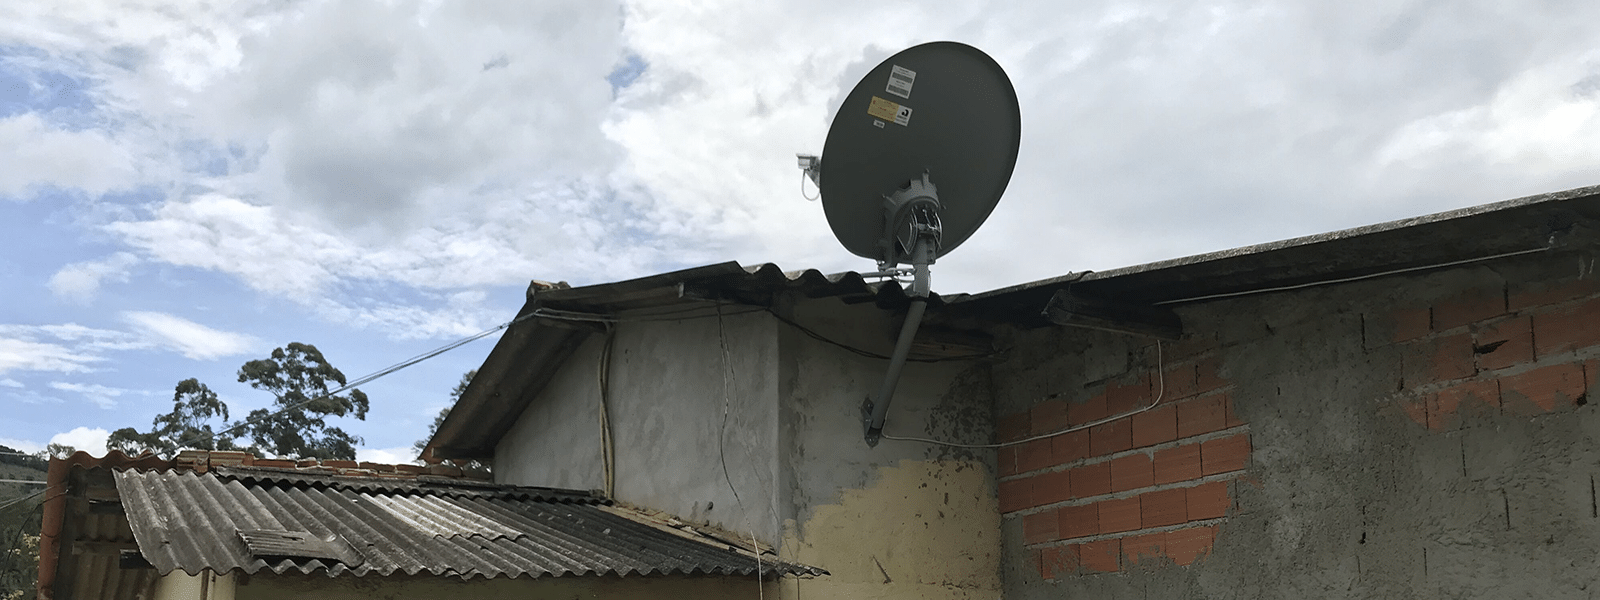 Satellite on house in Mexico